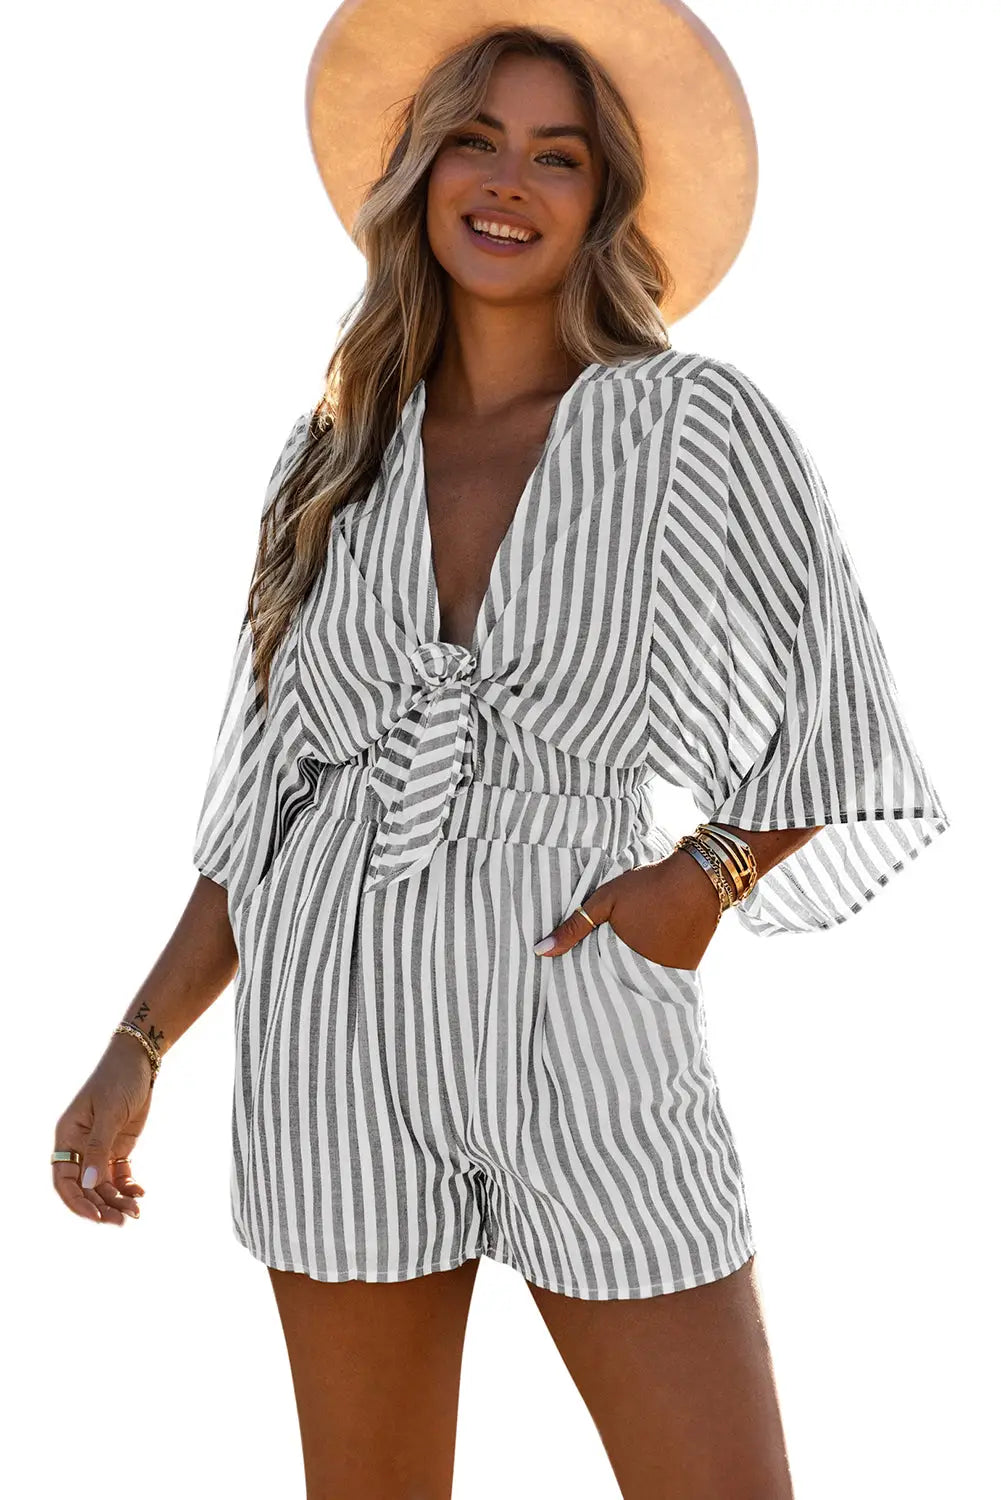 Gray 3/4 wide kimono sleeves tie front striped romper with pockets - jumpsuits & rompers